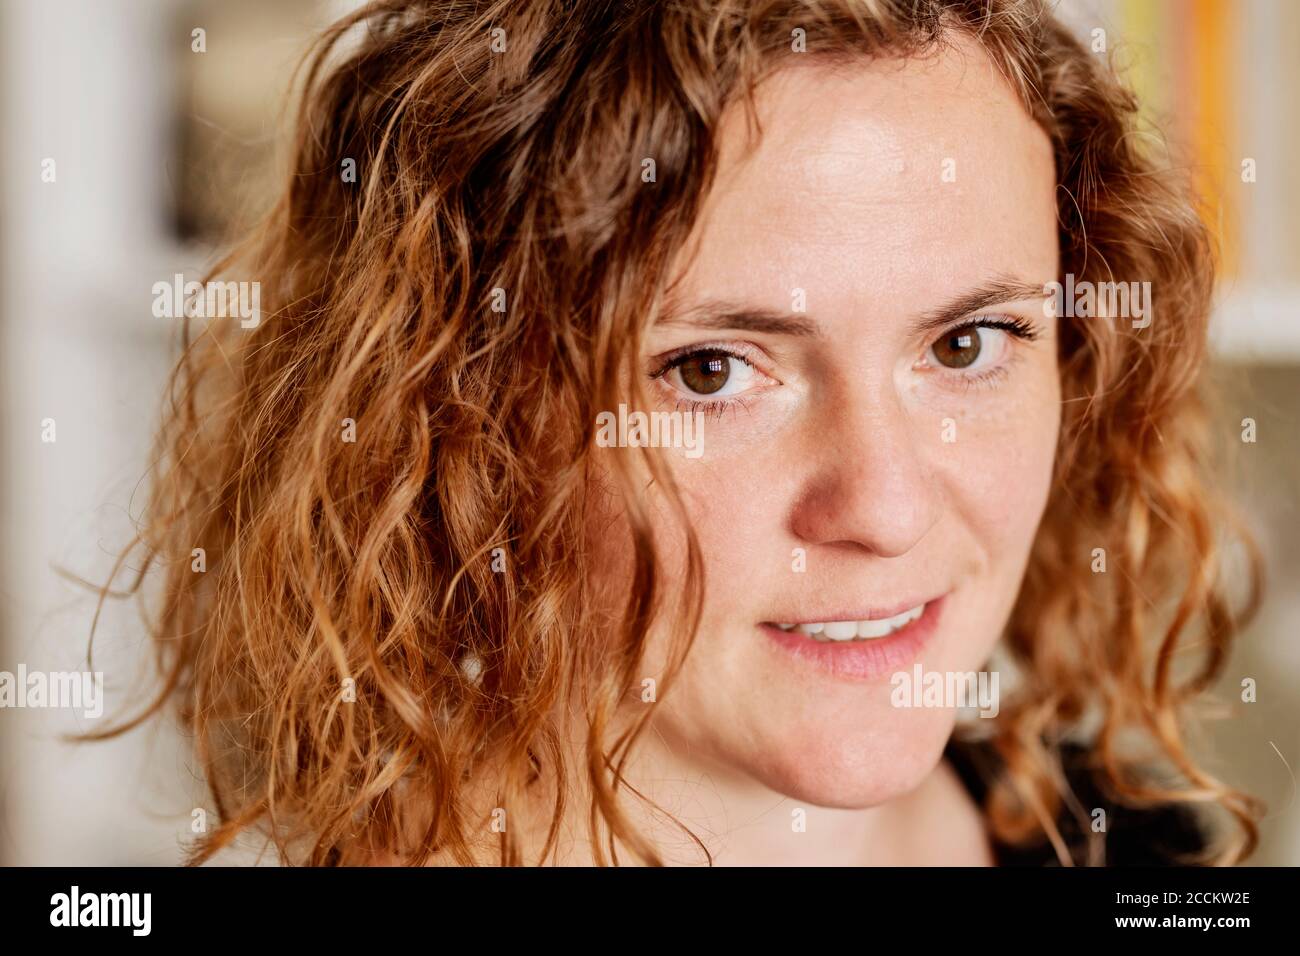 Close-up portrait of mid adult woman with wavy hair at home Stock Photo